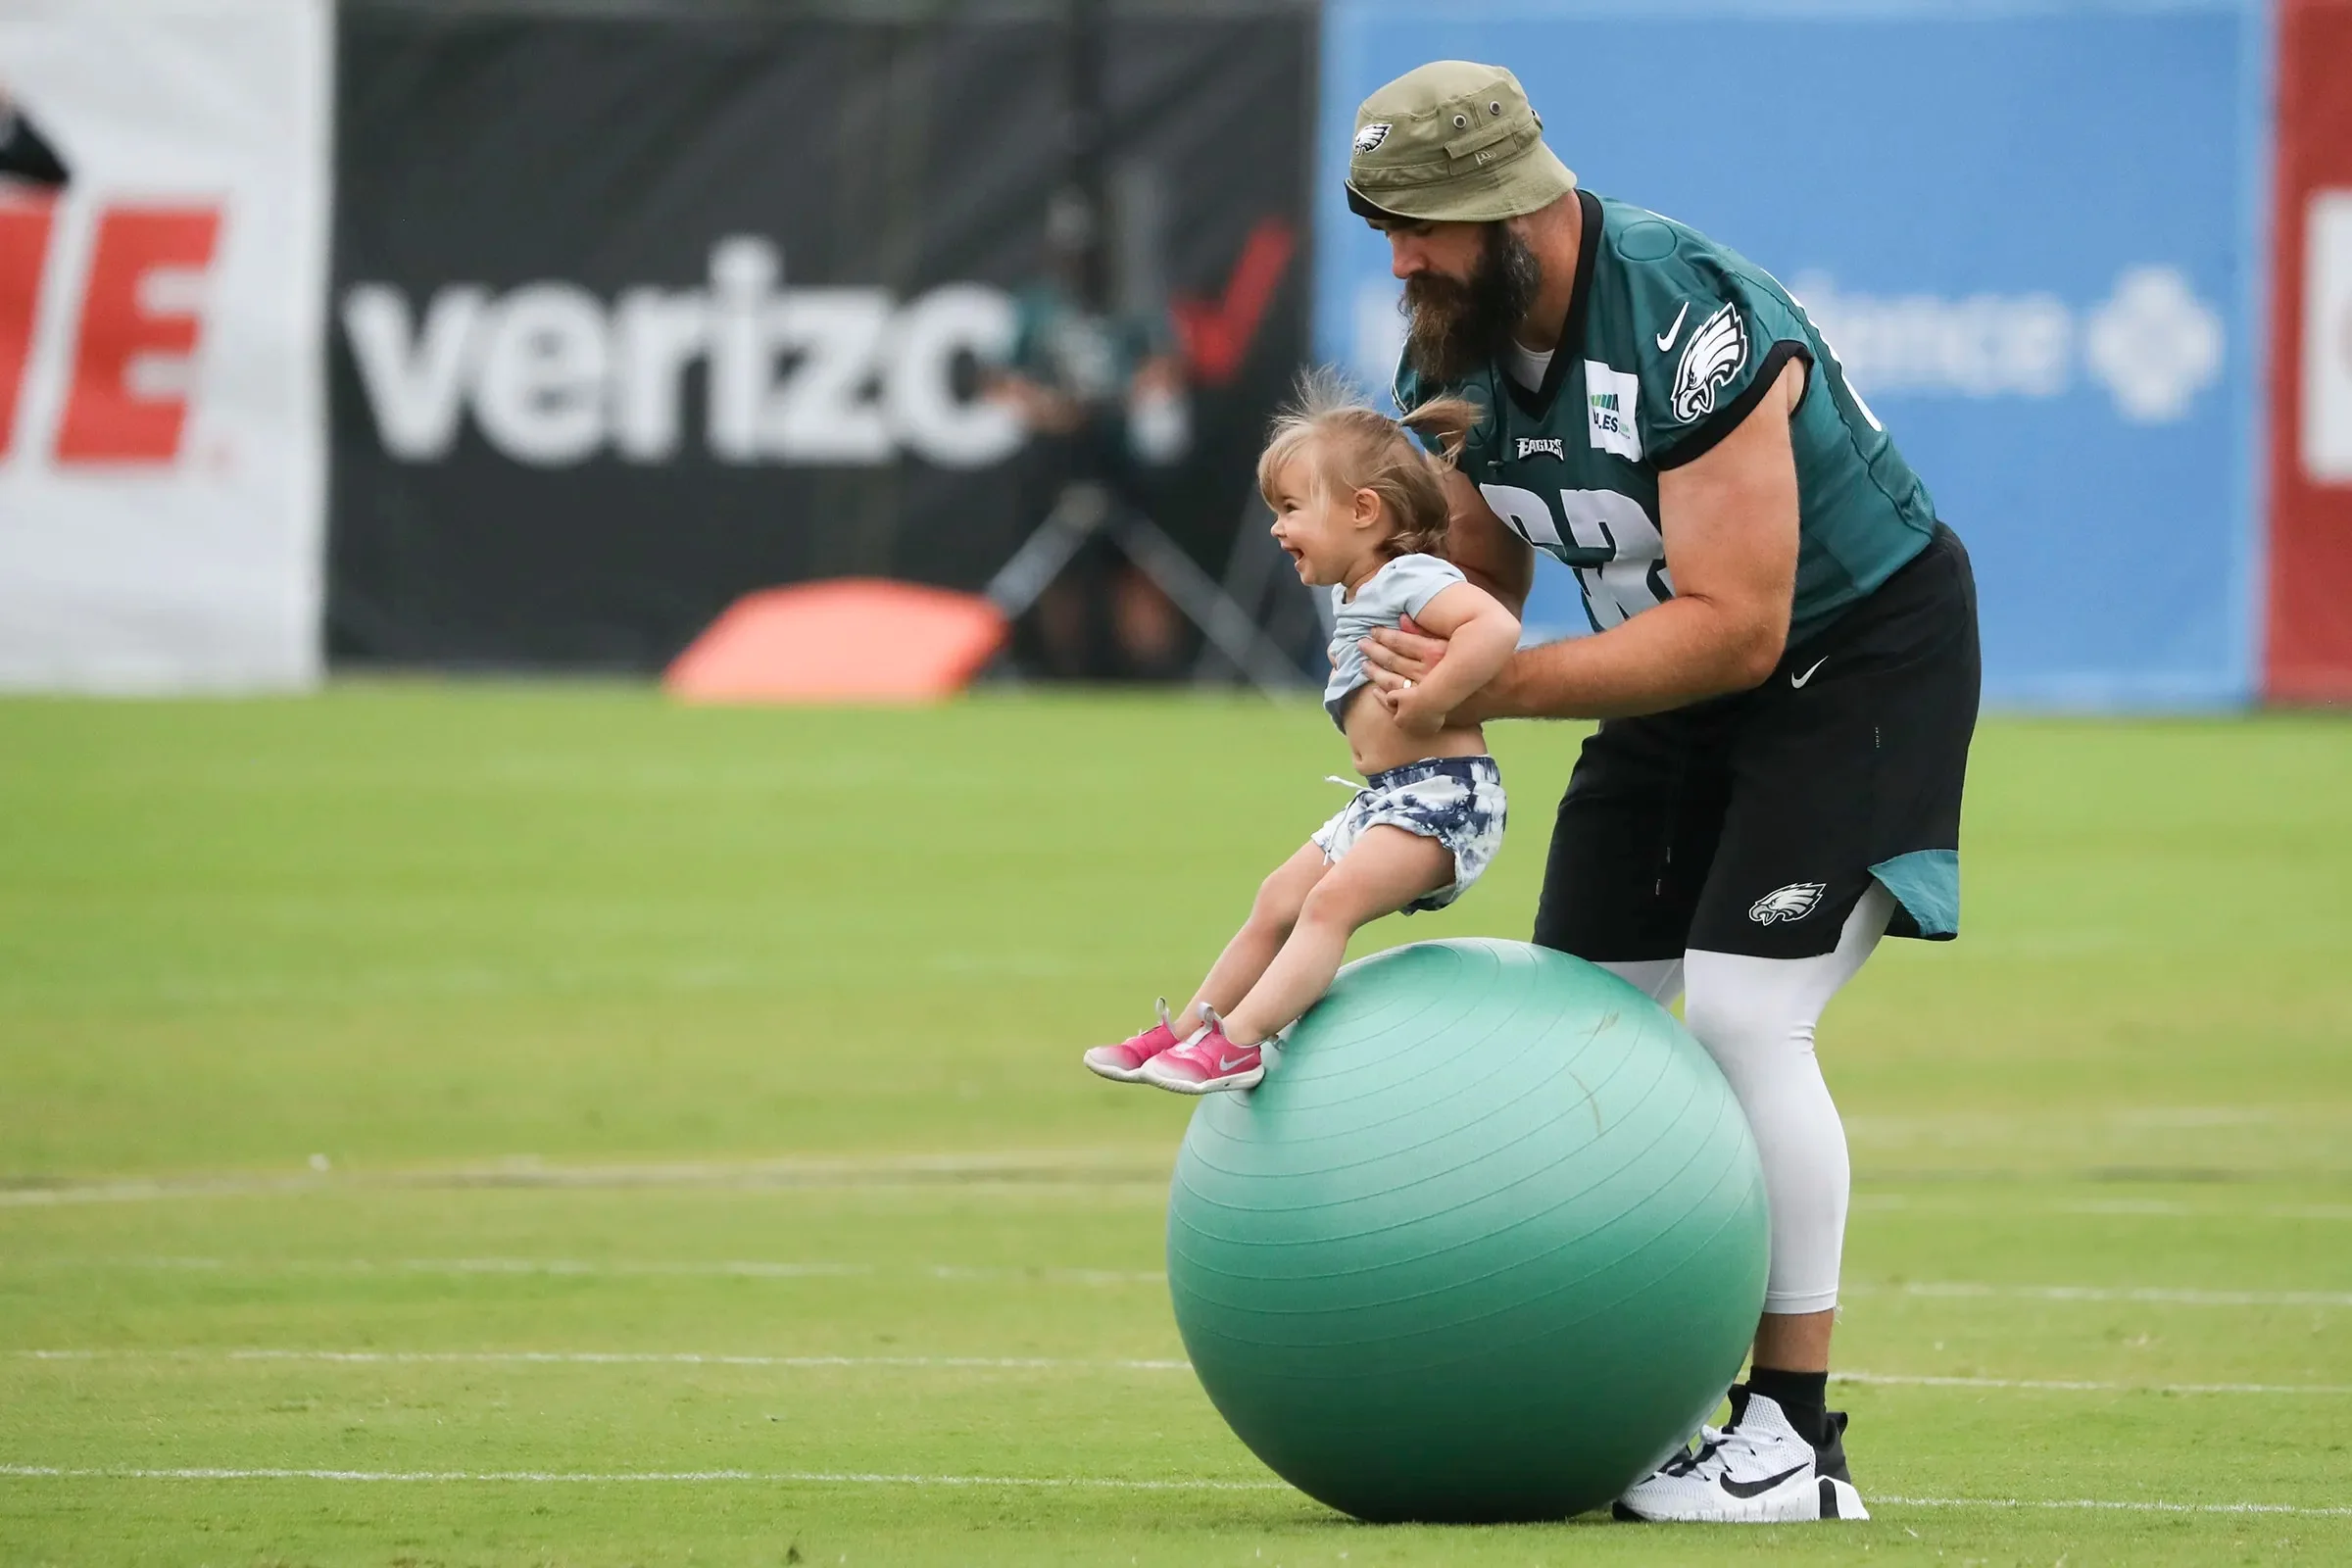 Who Is Wyatt Elizabeth Kelce? Know All About The Daughter Of Jason Kelce